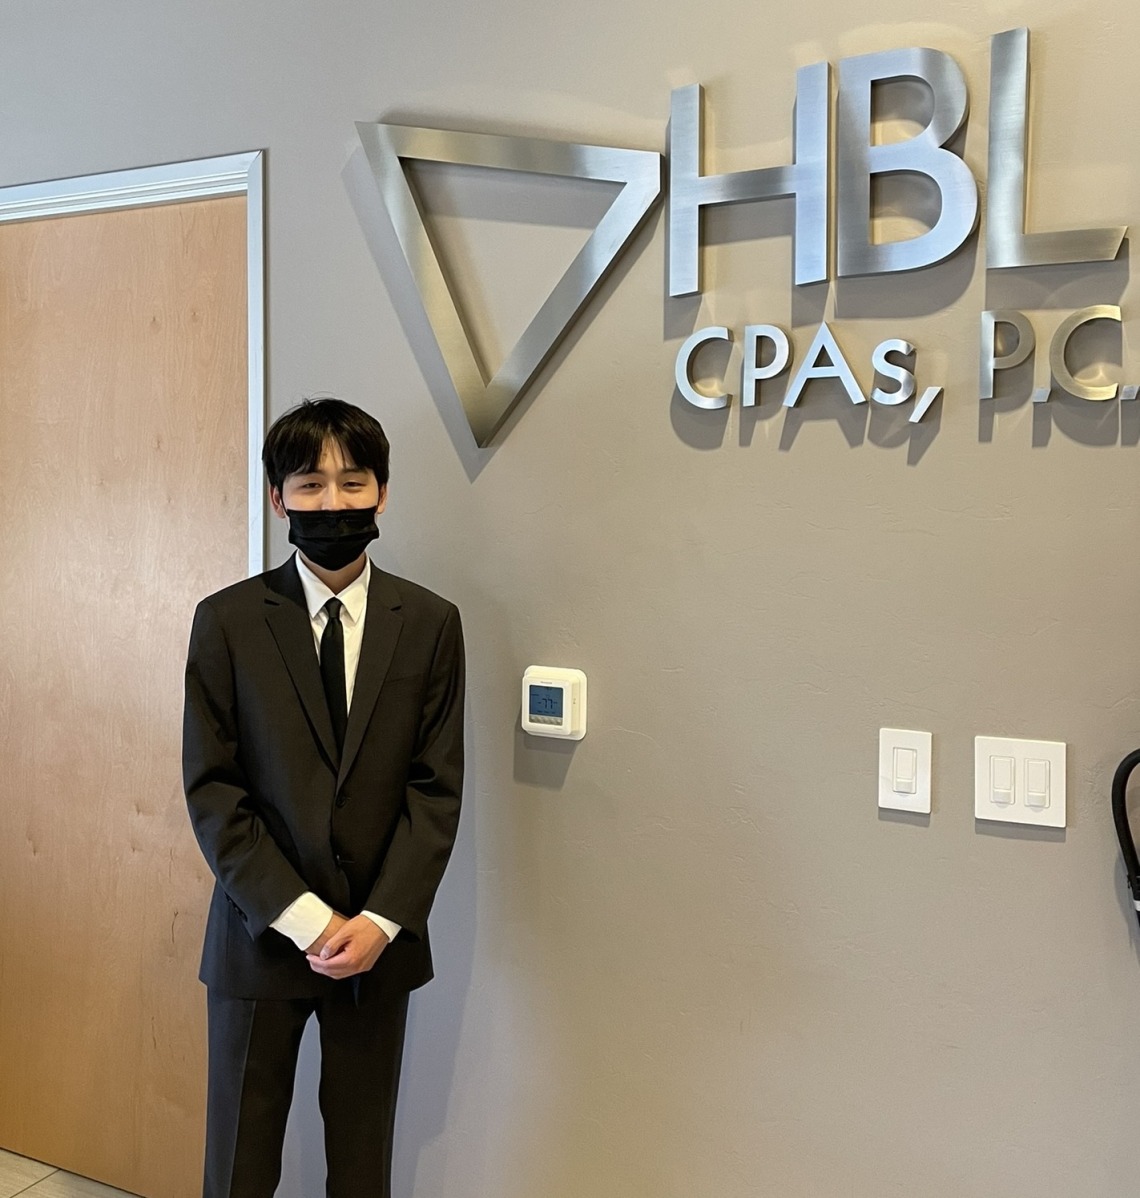 Simon Jeon standing in front of HBL CPAs P.C. metal signage.